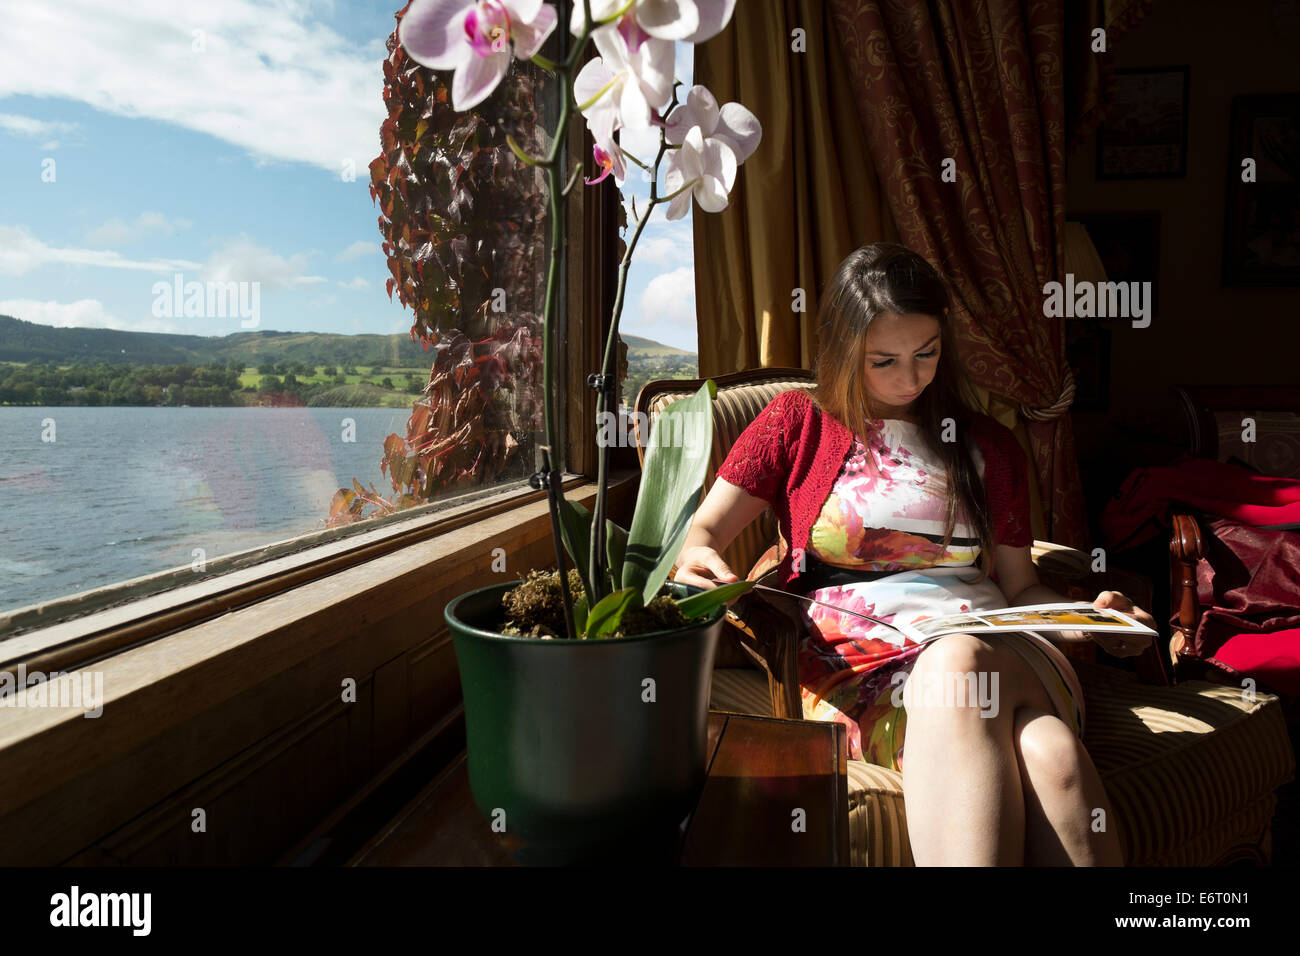 Sharrow bay, Cumbria, guest relaxing, reading in the summers sun. credit: LEE RAMSDEN / ALAMY Stock Photo